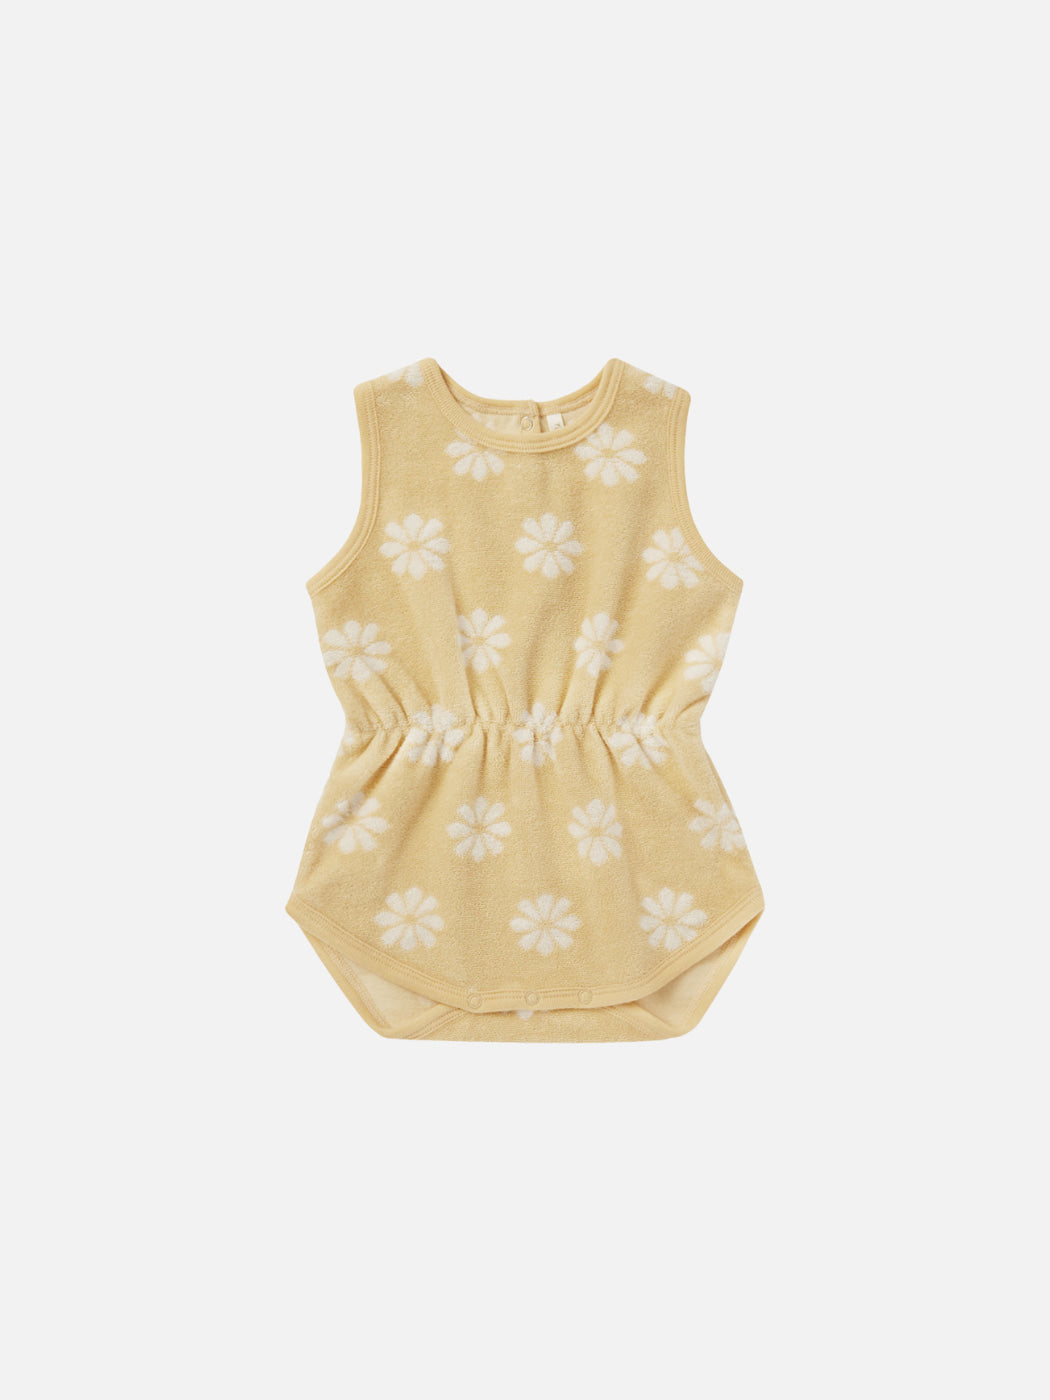 Rylee + Cru cinch playsuit in yellow fabric with white flowers